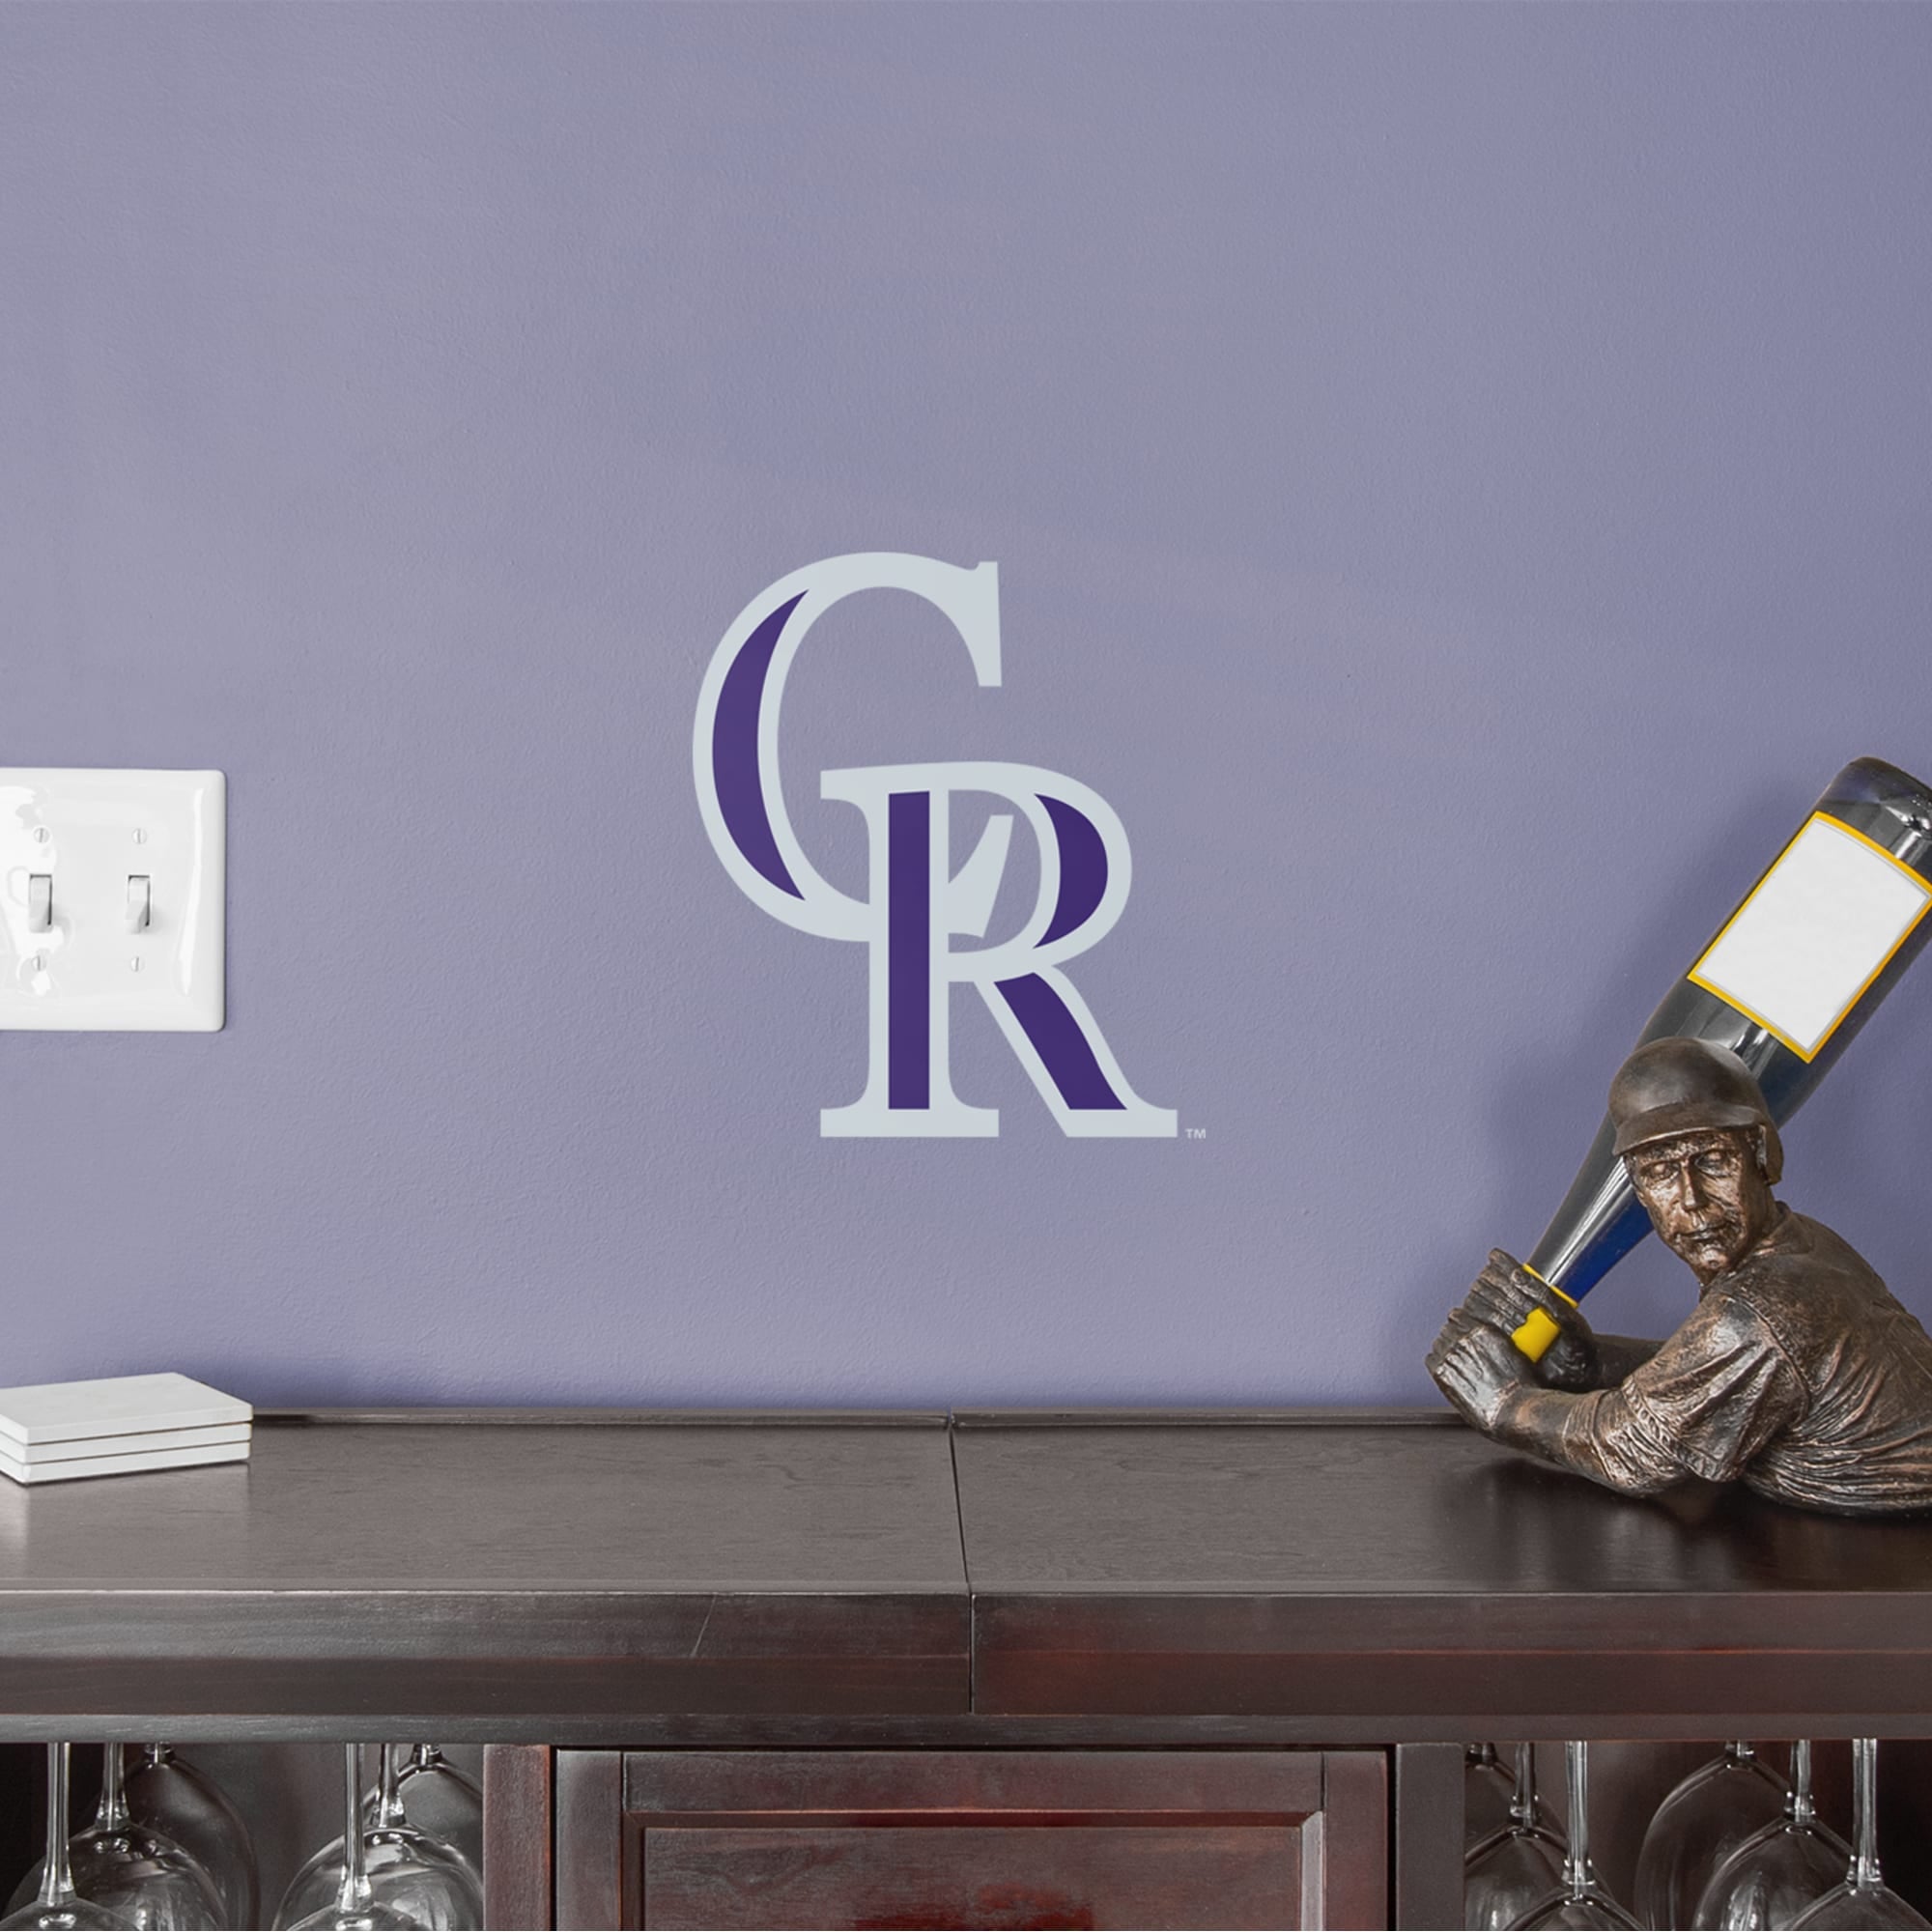 Colorado Rockies: "CR" Logo - Officially Licensed MLB Removable Wall Decal Large by Fathead | Vinyl